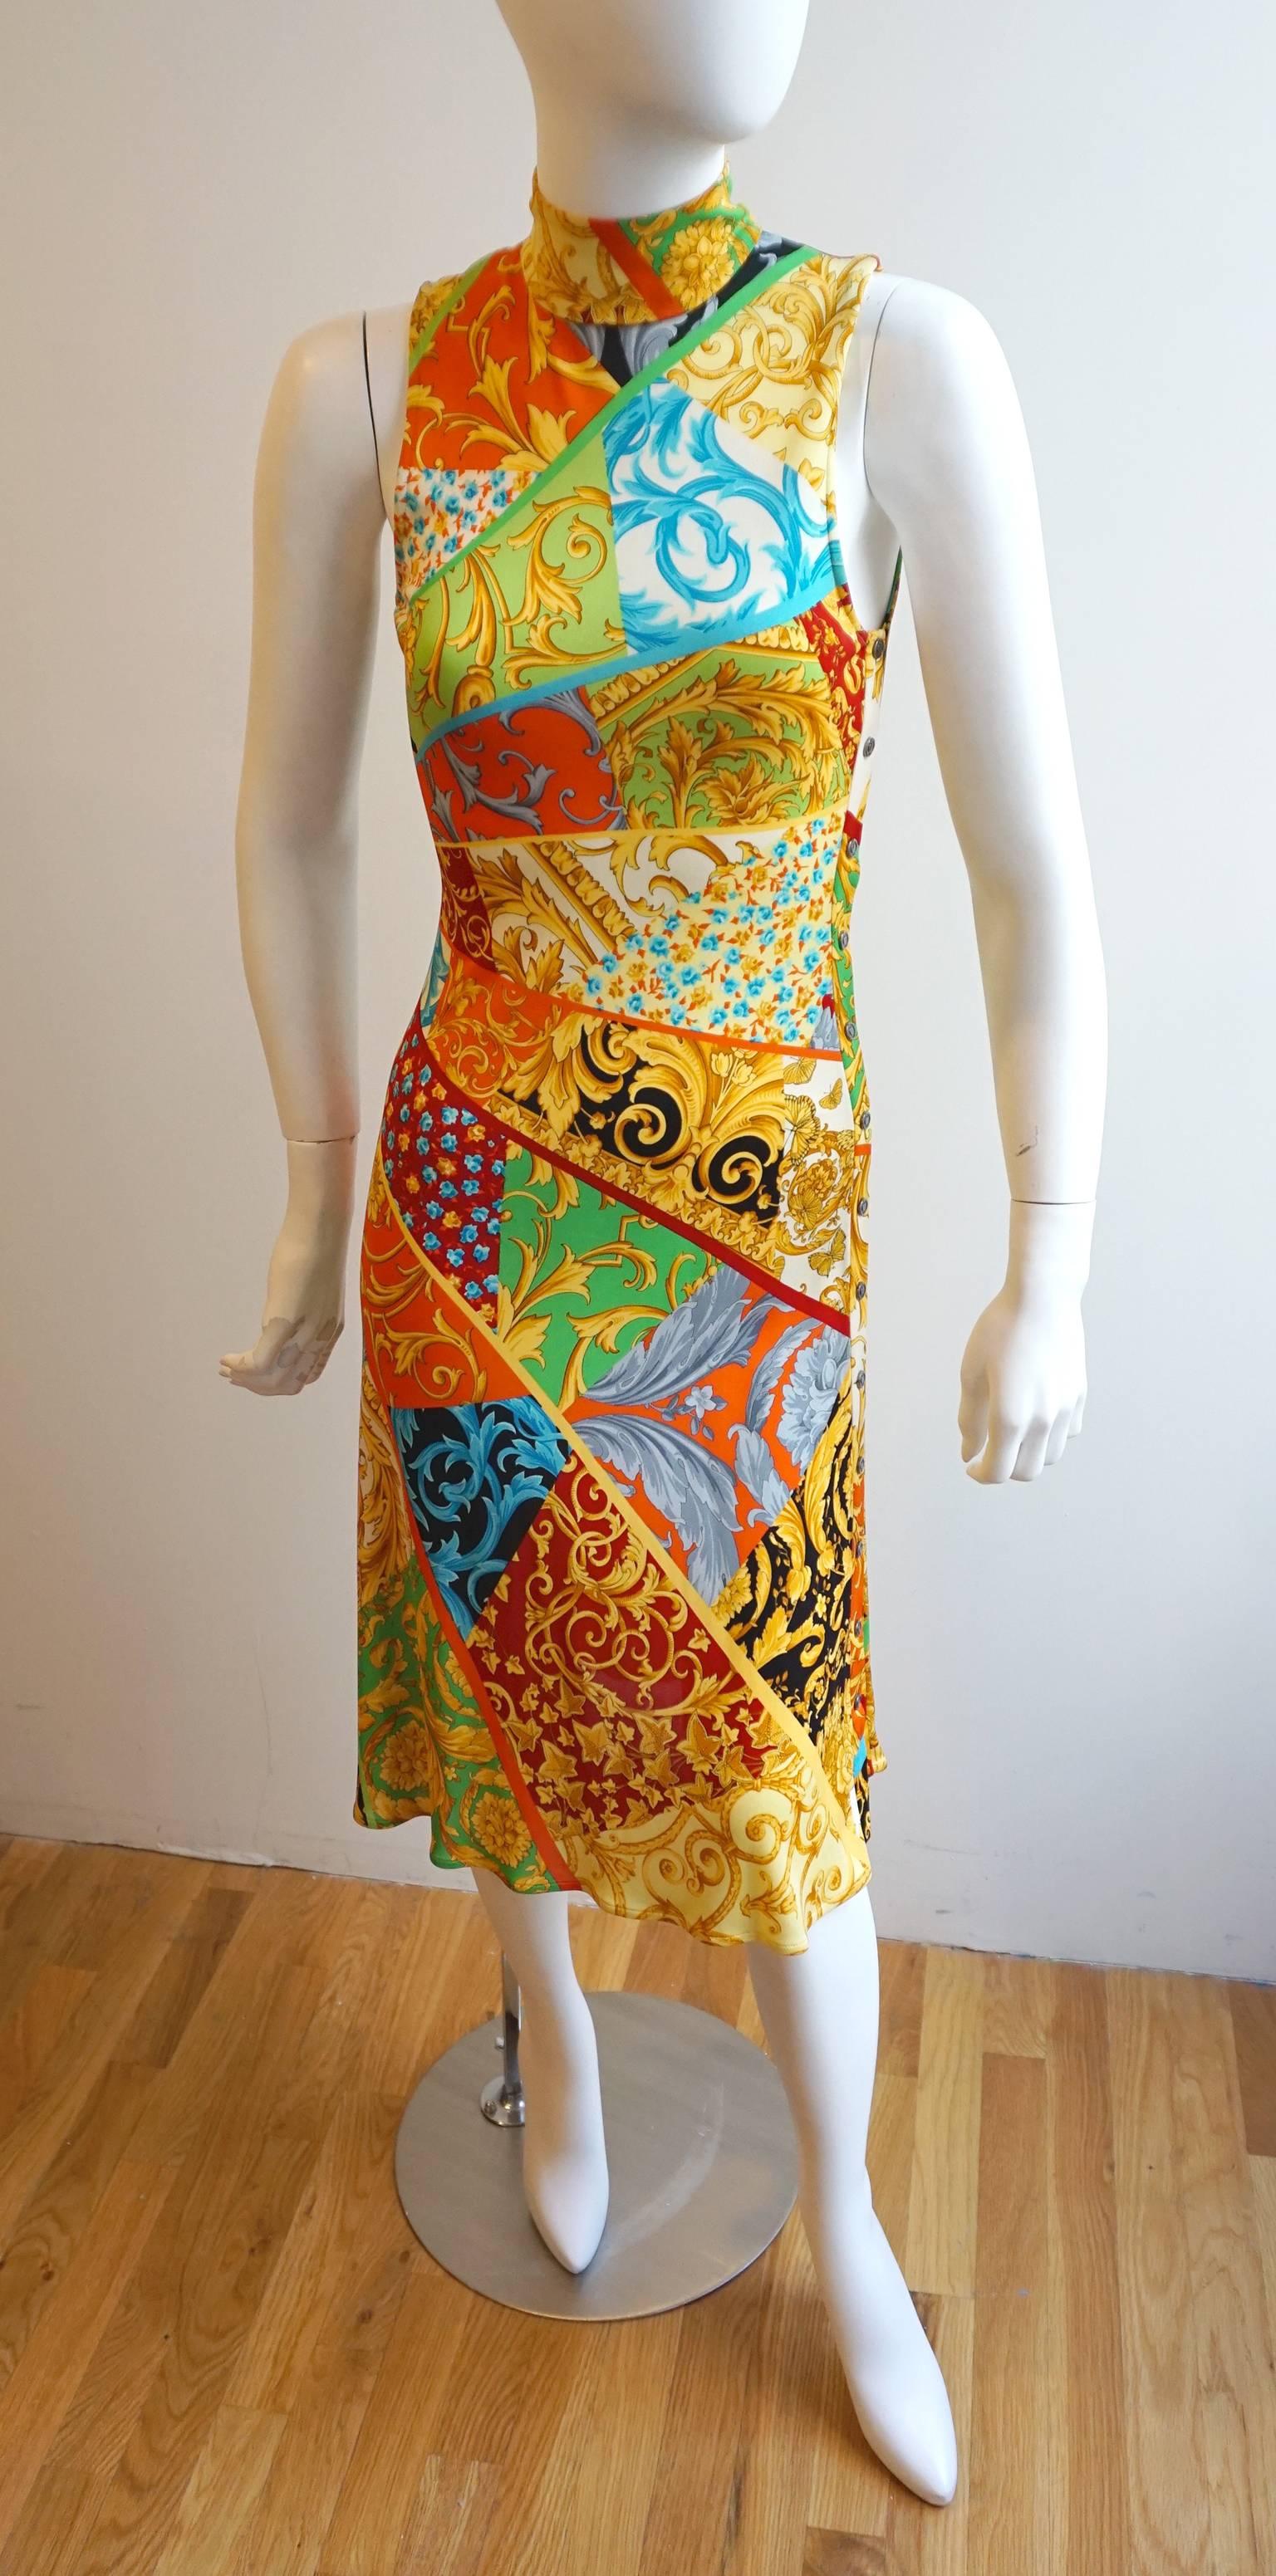 The print of this dressis quintessential VERSACE. The bold colors and prints are segmented and flare out from the right side of the waist. This highlights the body. There is a mock neck that is secured with double snaps on the back of the neck.